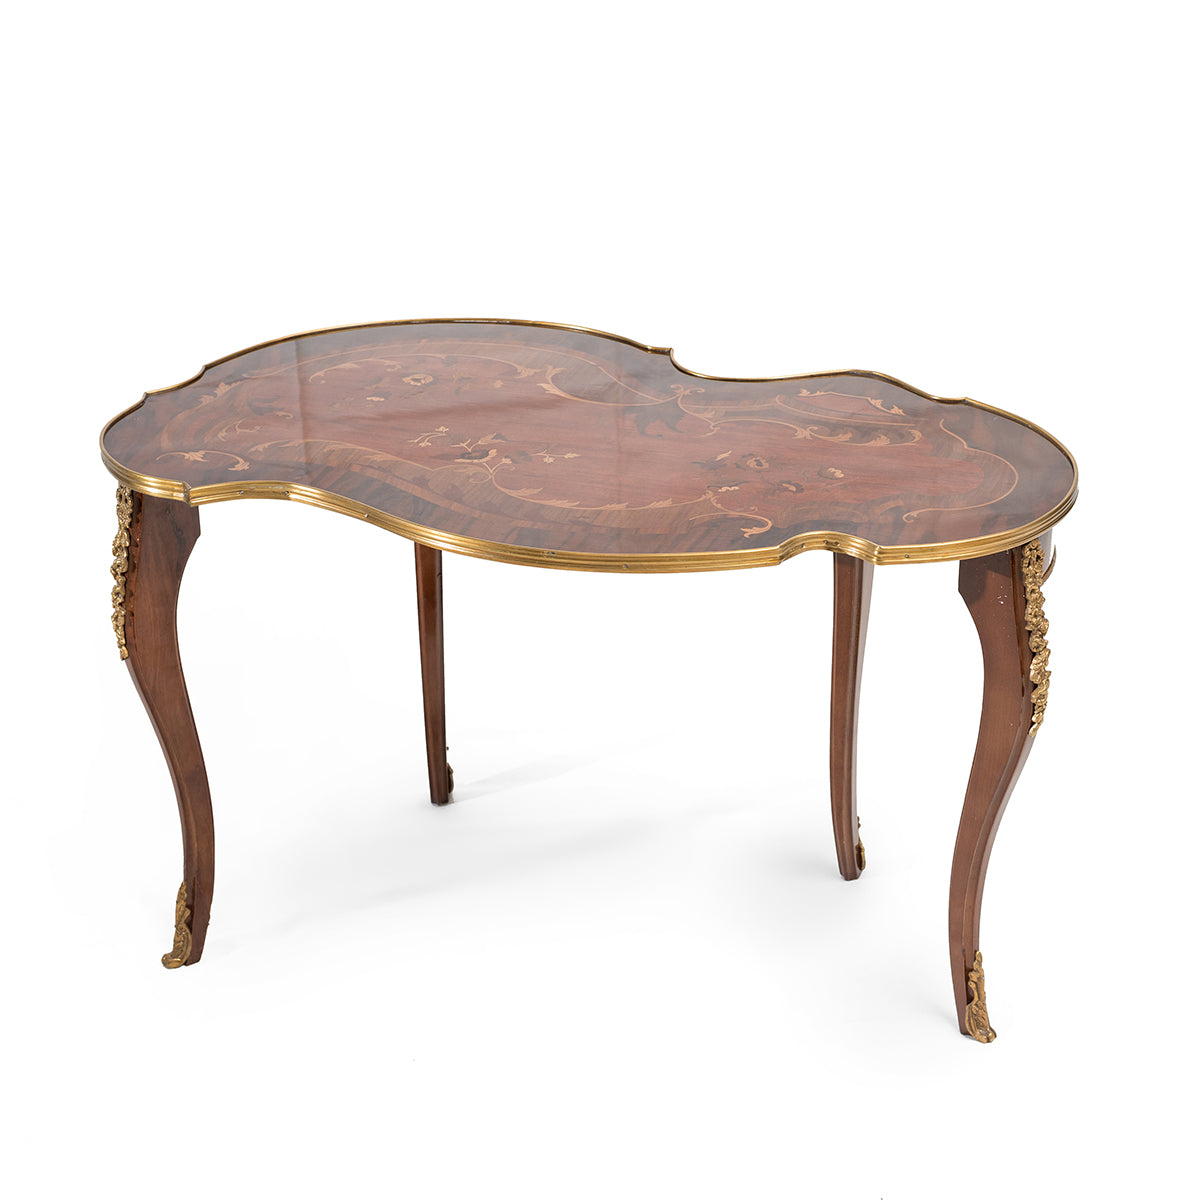 Louis XV Hand Carved Inlaid Nesting Tables (3 set)